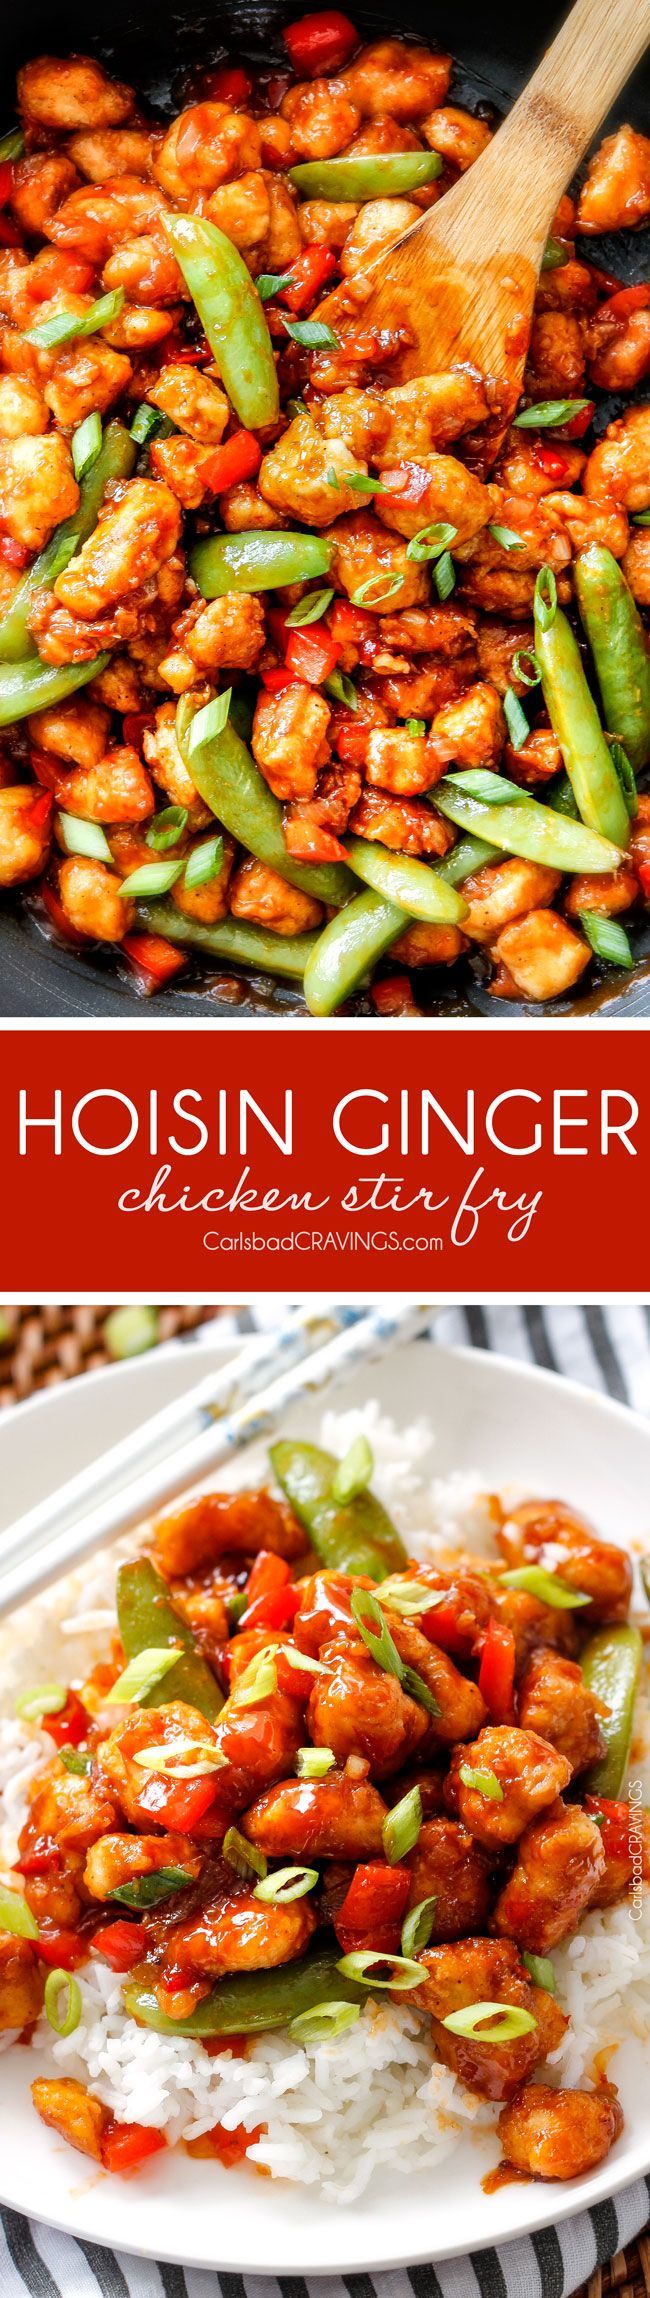 Hoisin Ginger Chicken Stir Fry – my family went crazy over this chicken and gobble